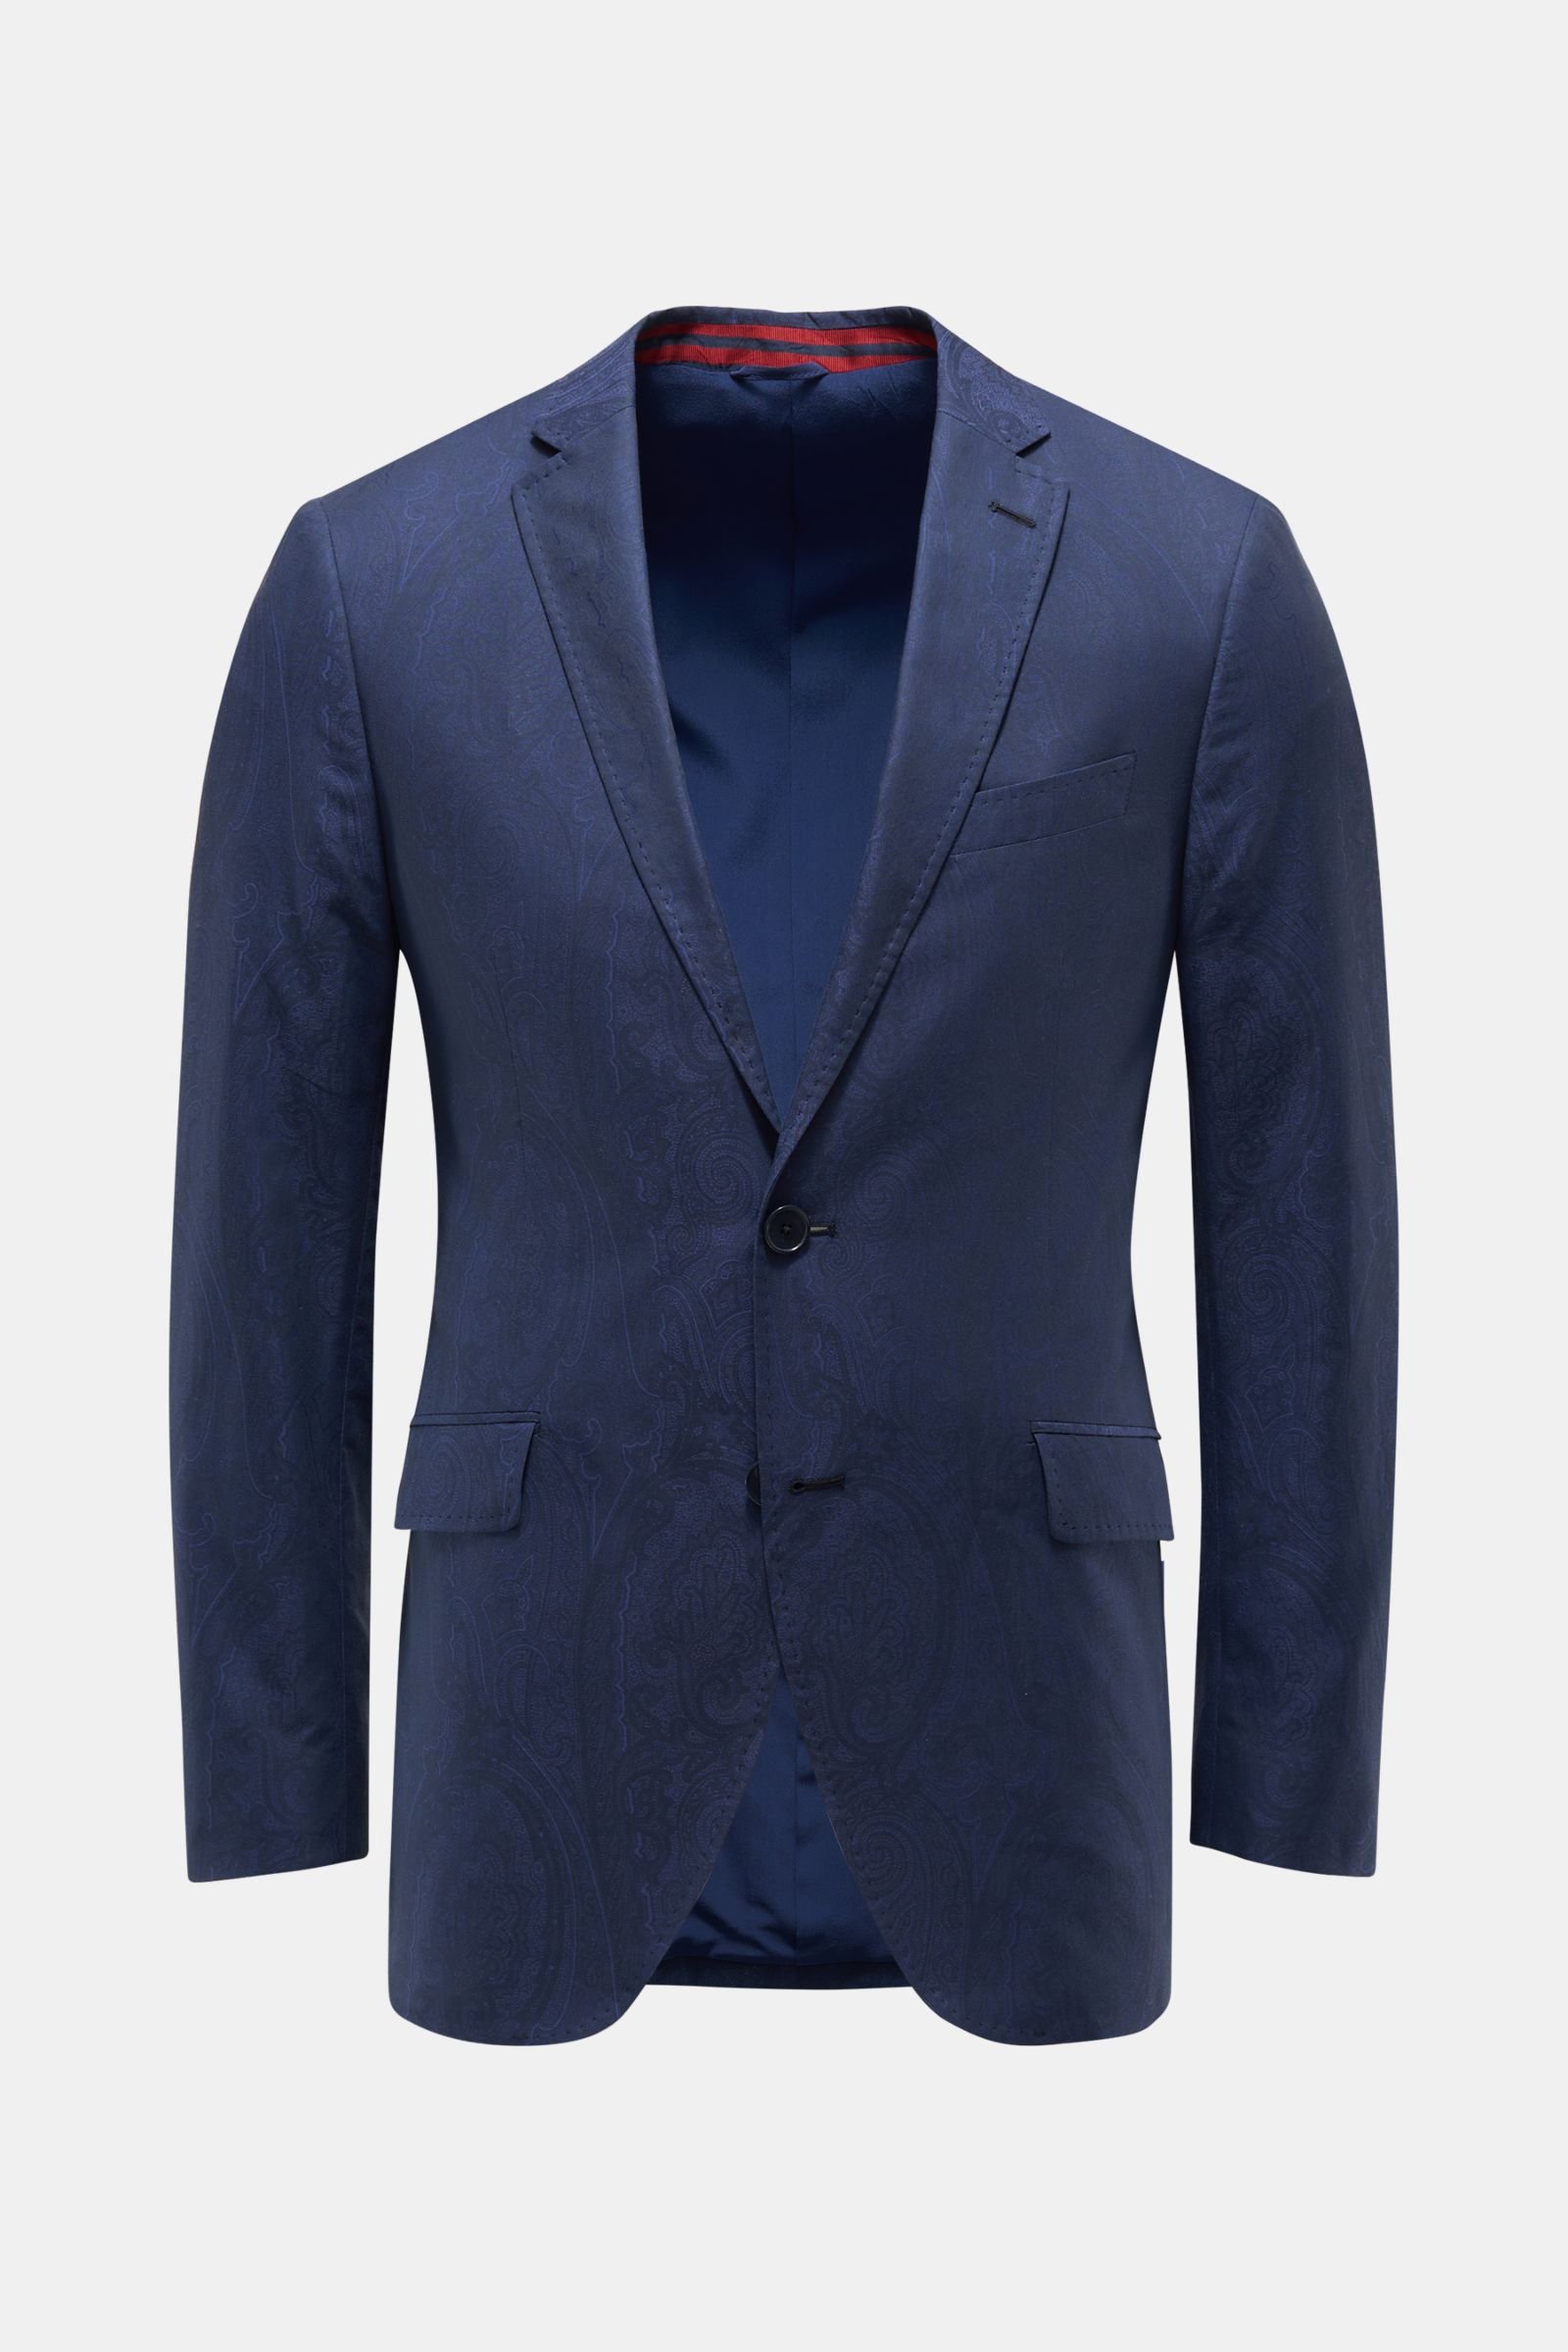 Smart-casual jacket navy patterned 